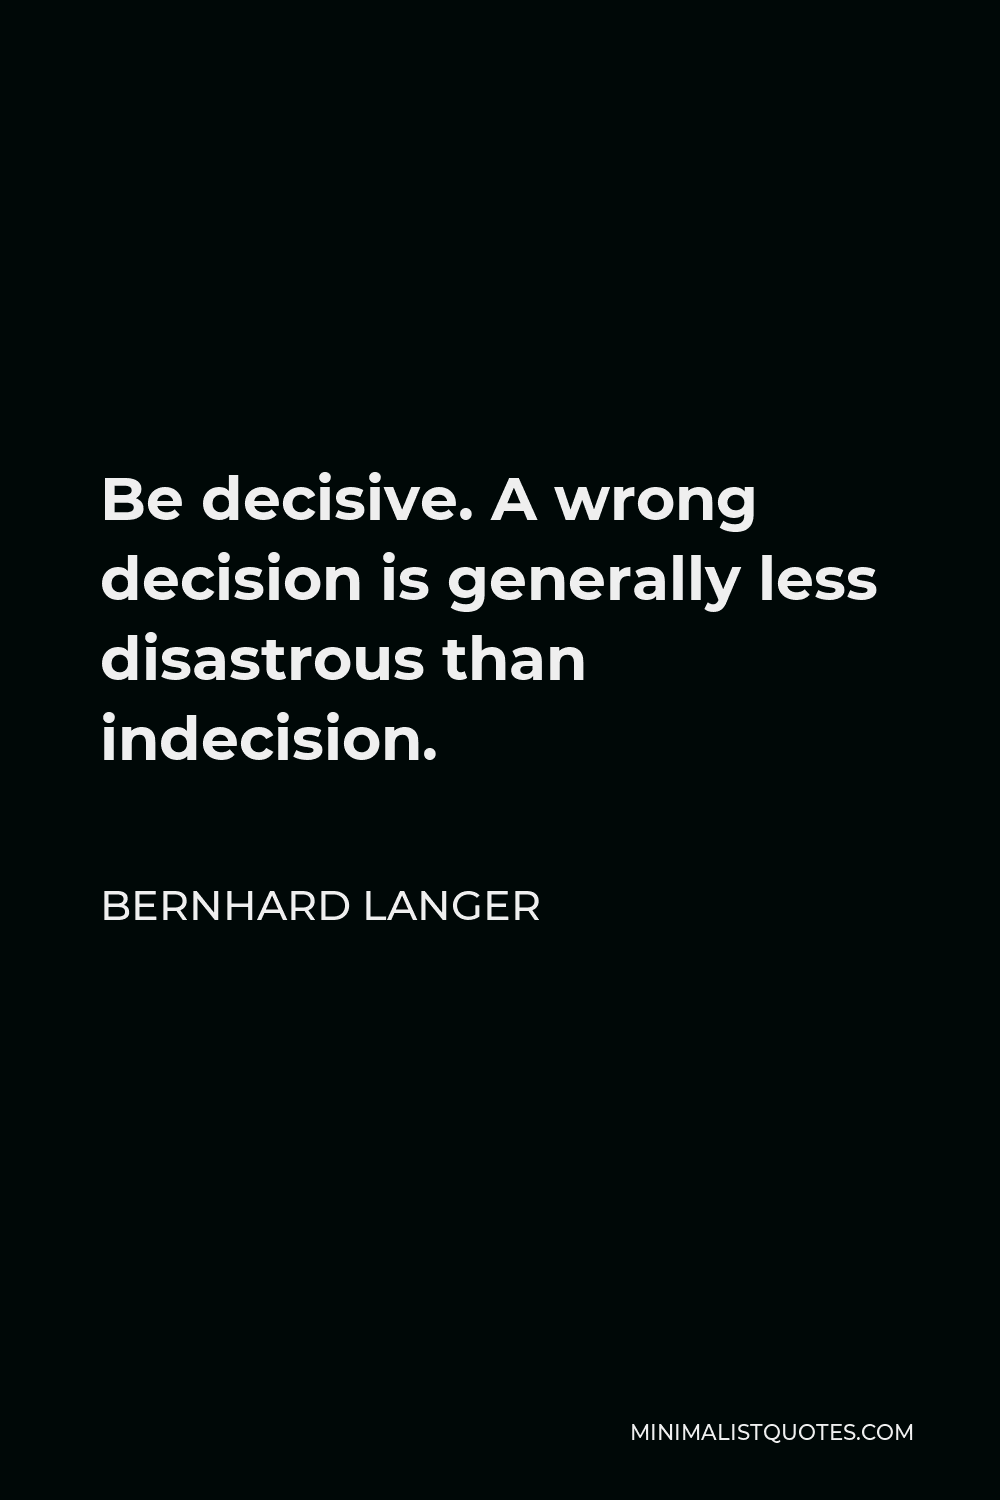 Bernhard Langer Quote - Be decisive. A wrong decision is generally less disastrous than indecision.